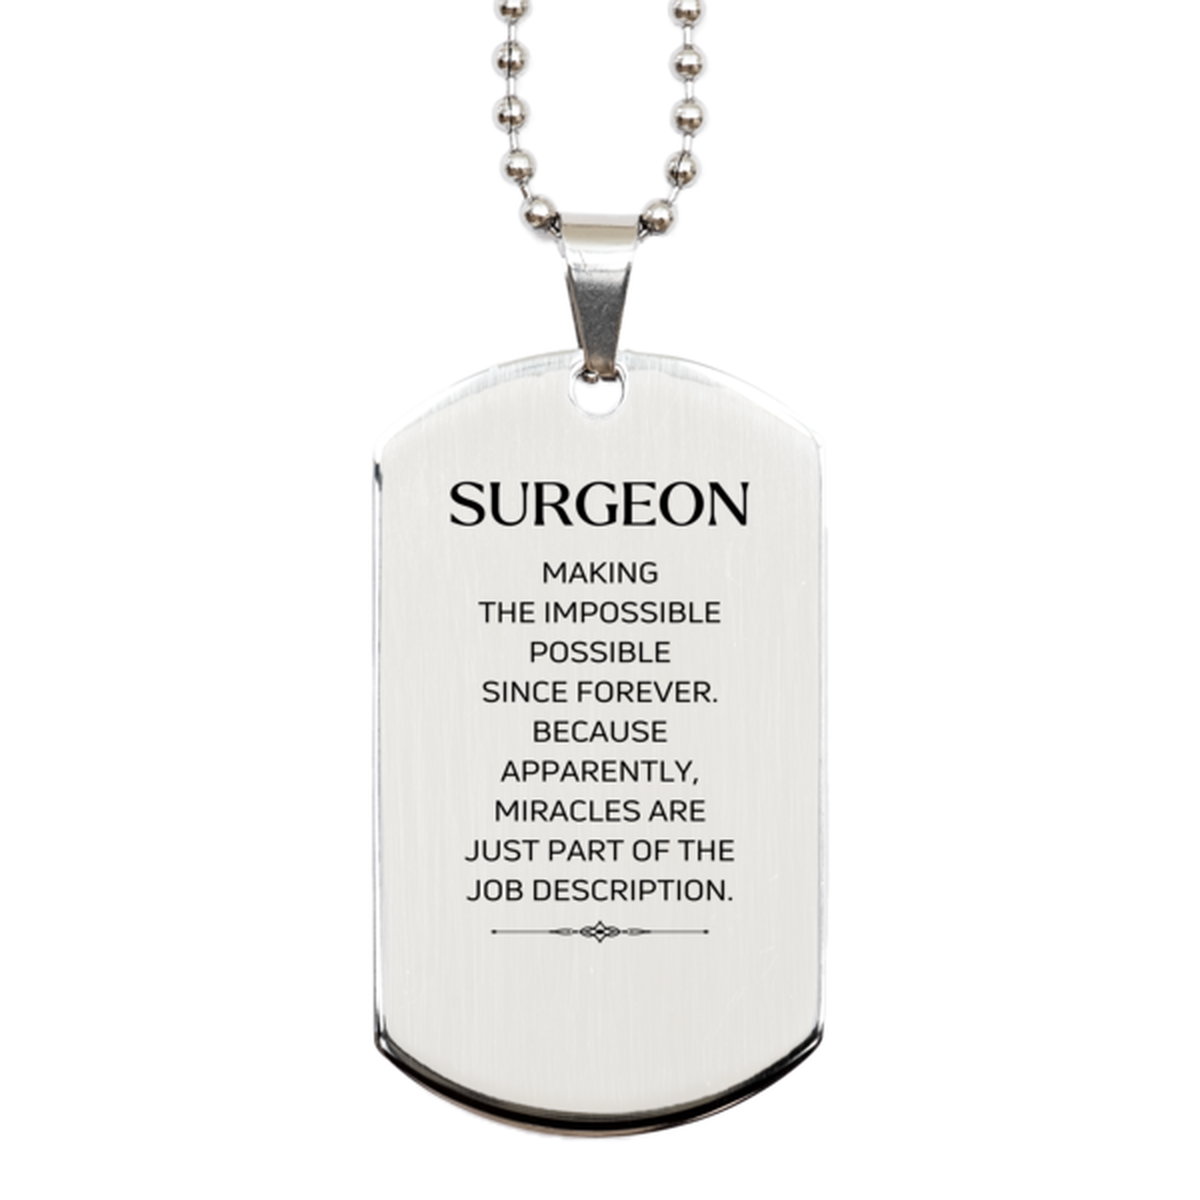 Funny Surgeon Gifts, Miracles are just part of the job description, Inspirational Birthday Silver Dog Tag For Surgeon, Men, Women, Coworkers, Friends, Boss